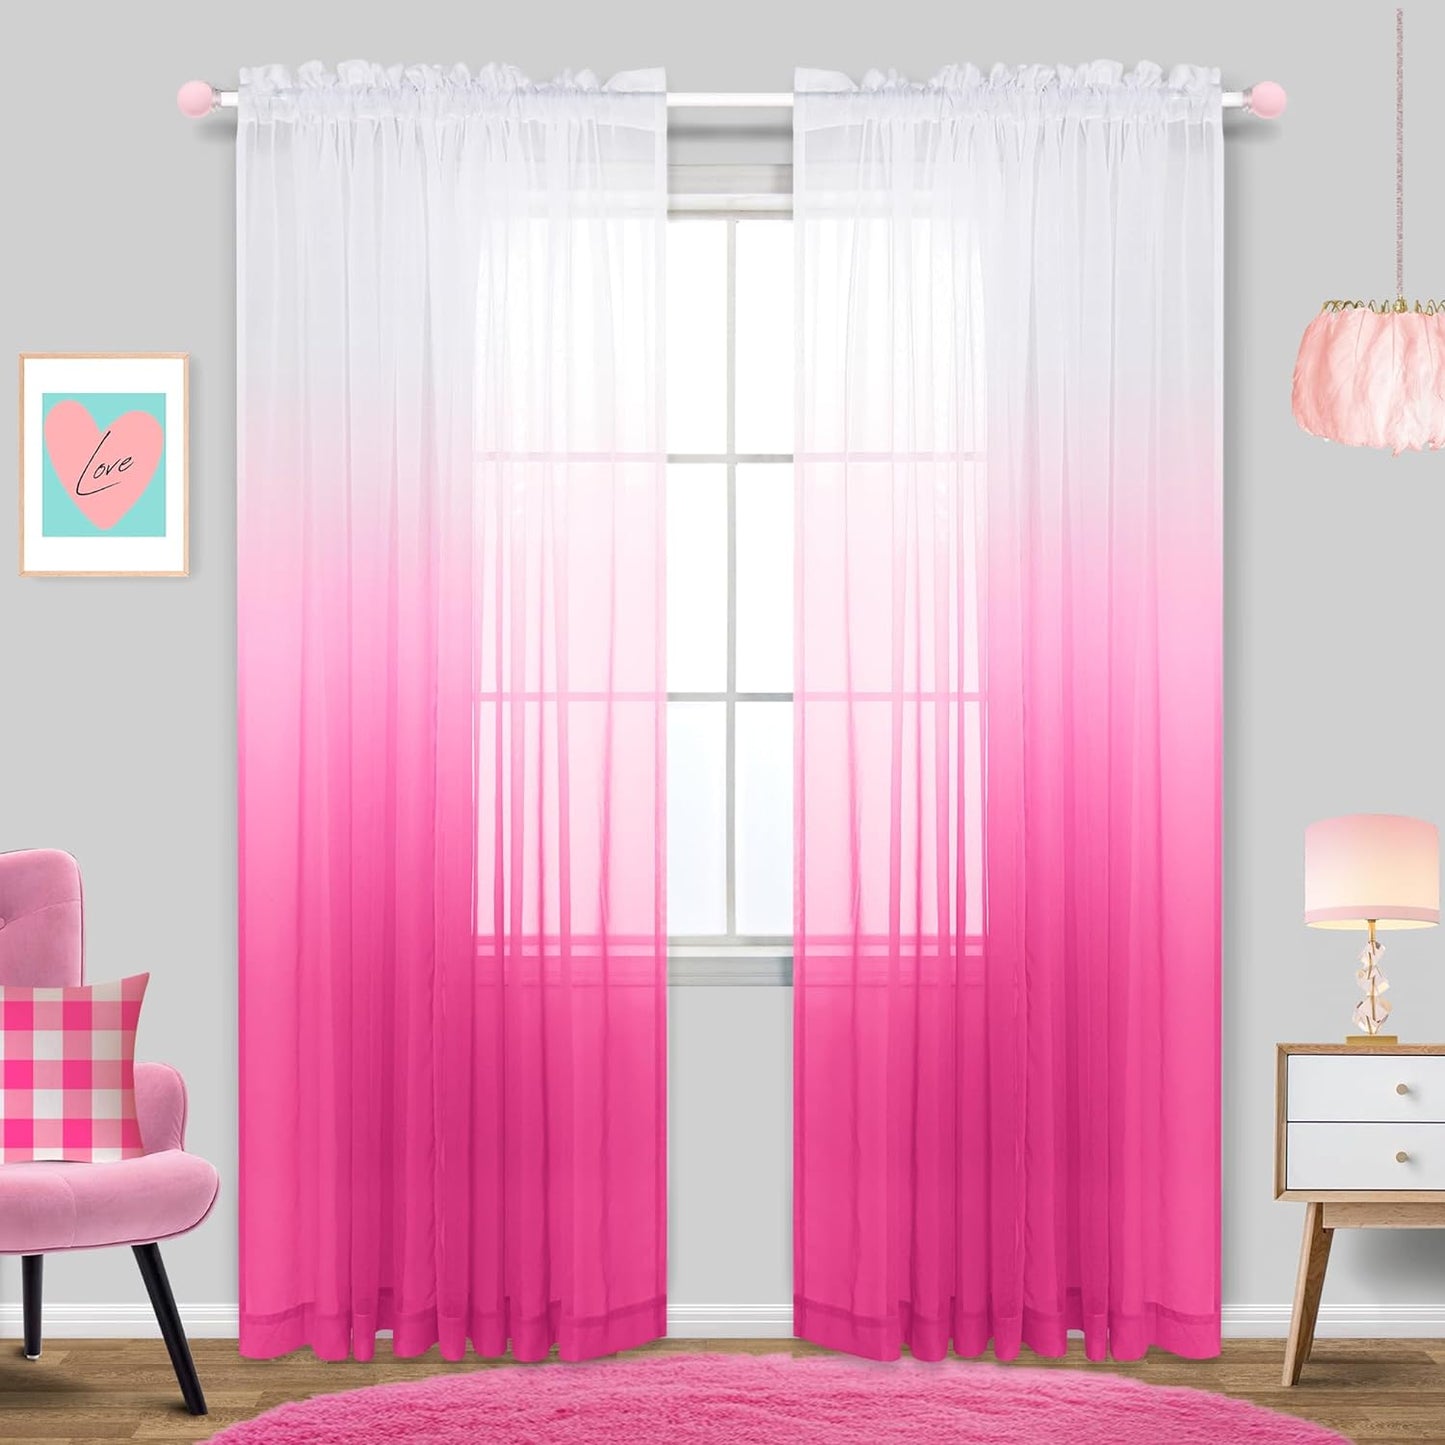 KOUFALL Sage Green Curtains 63 Inch Length for Living Room,2 Panel Set Rod Pocket Boho Curtains for Bedroom 63 Inches Long  KOUFALL TEXTILE Pink 52X84 